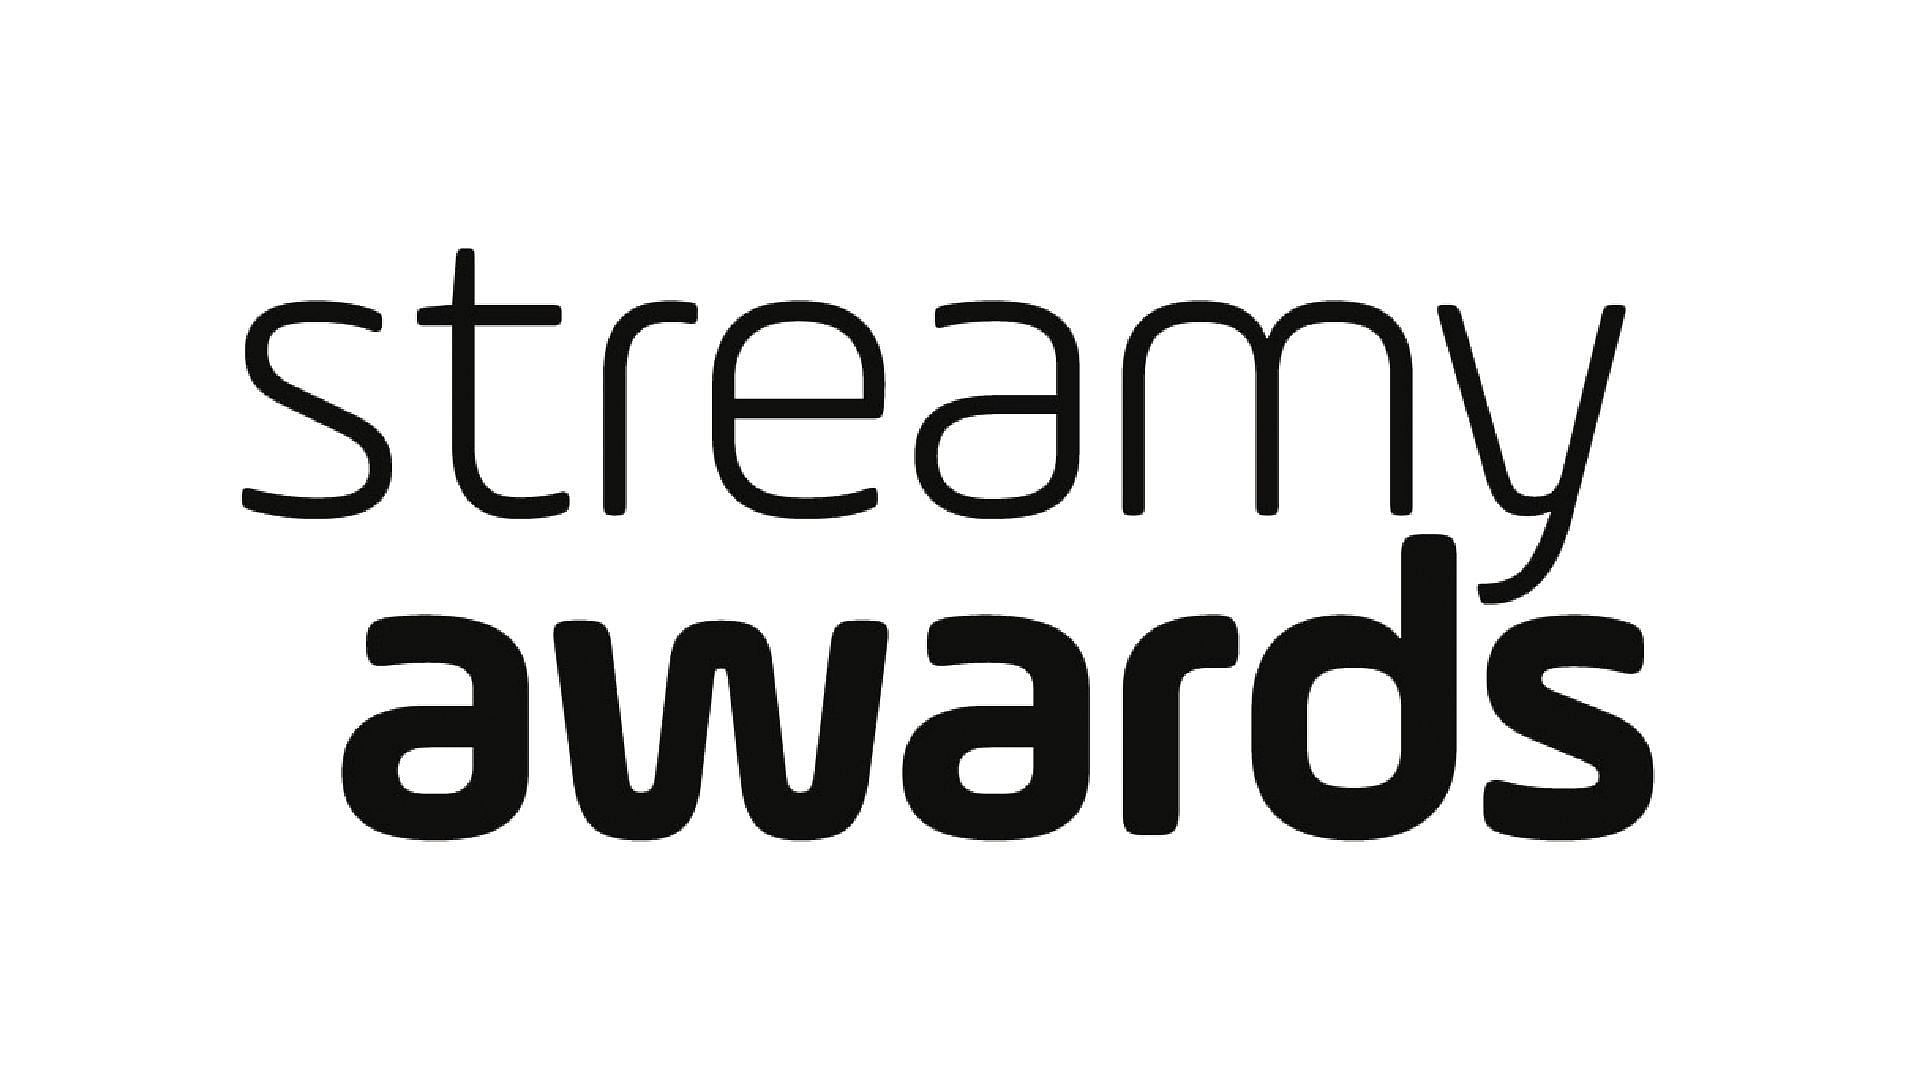 The Streamy Awards took place last year in August (Image via Streamy Awards)